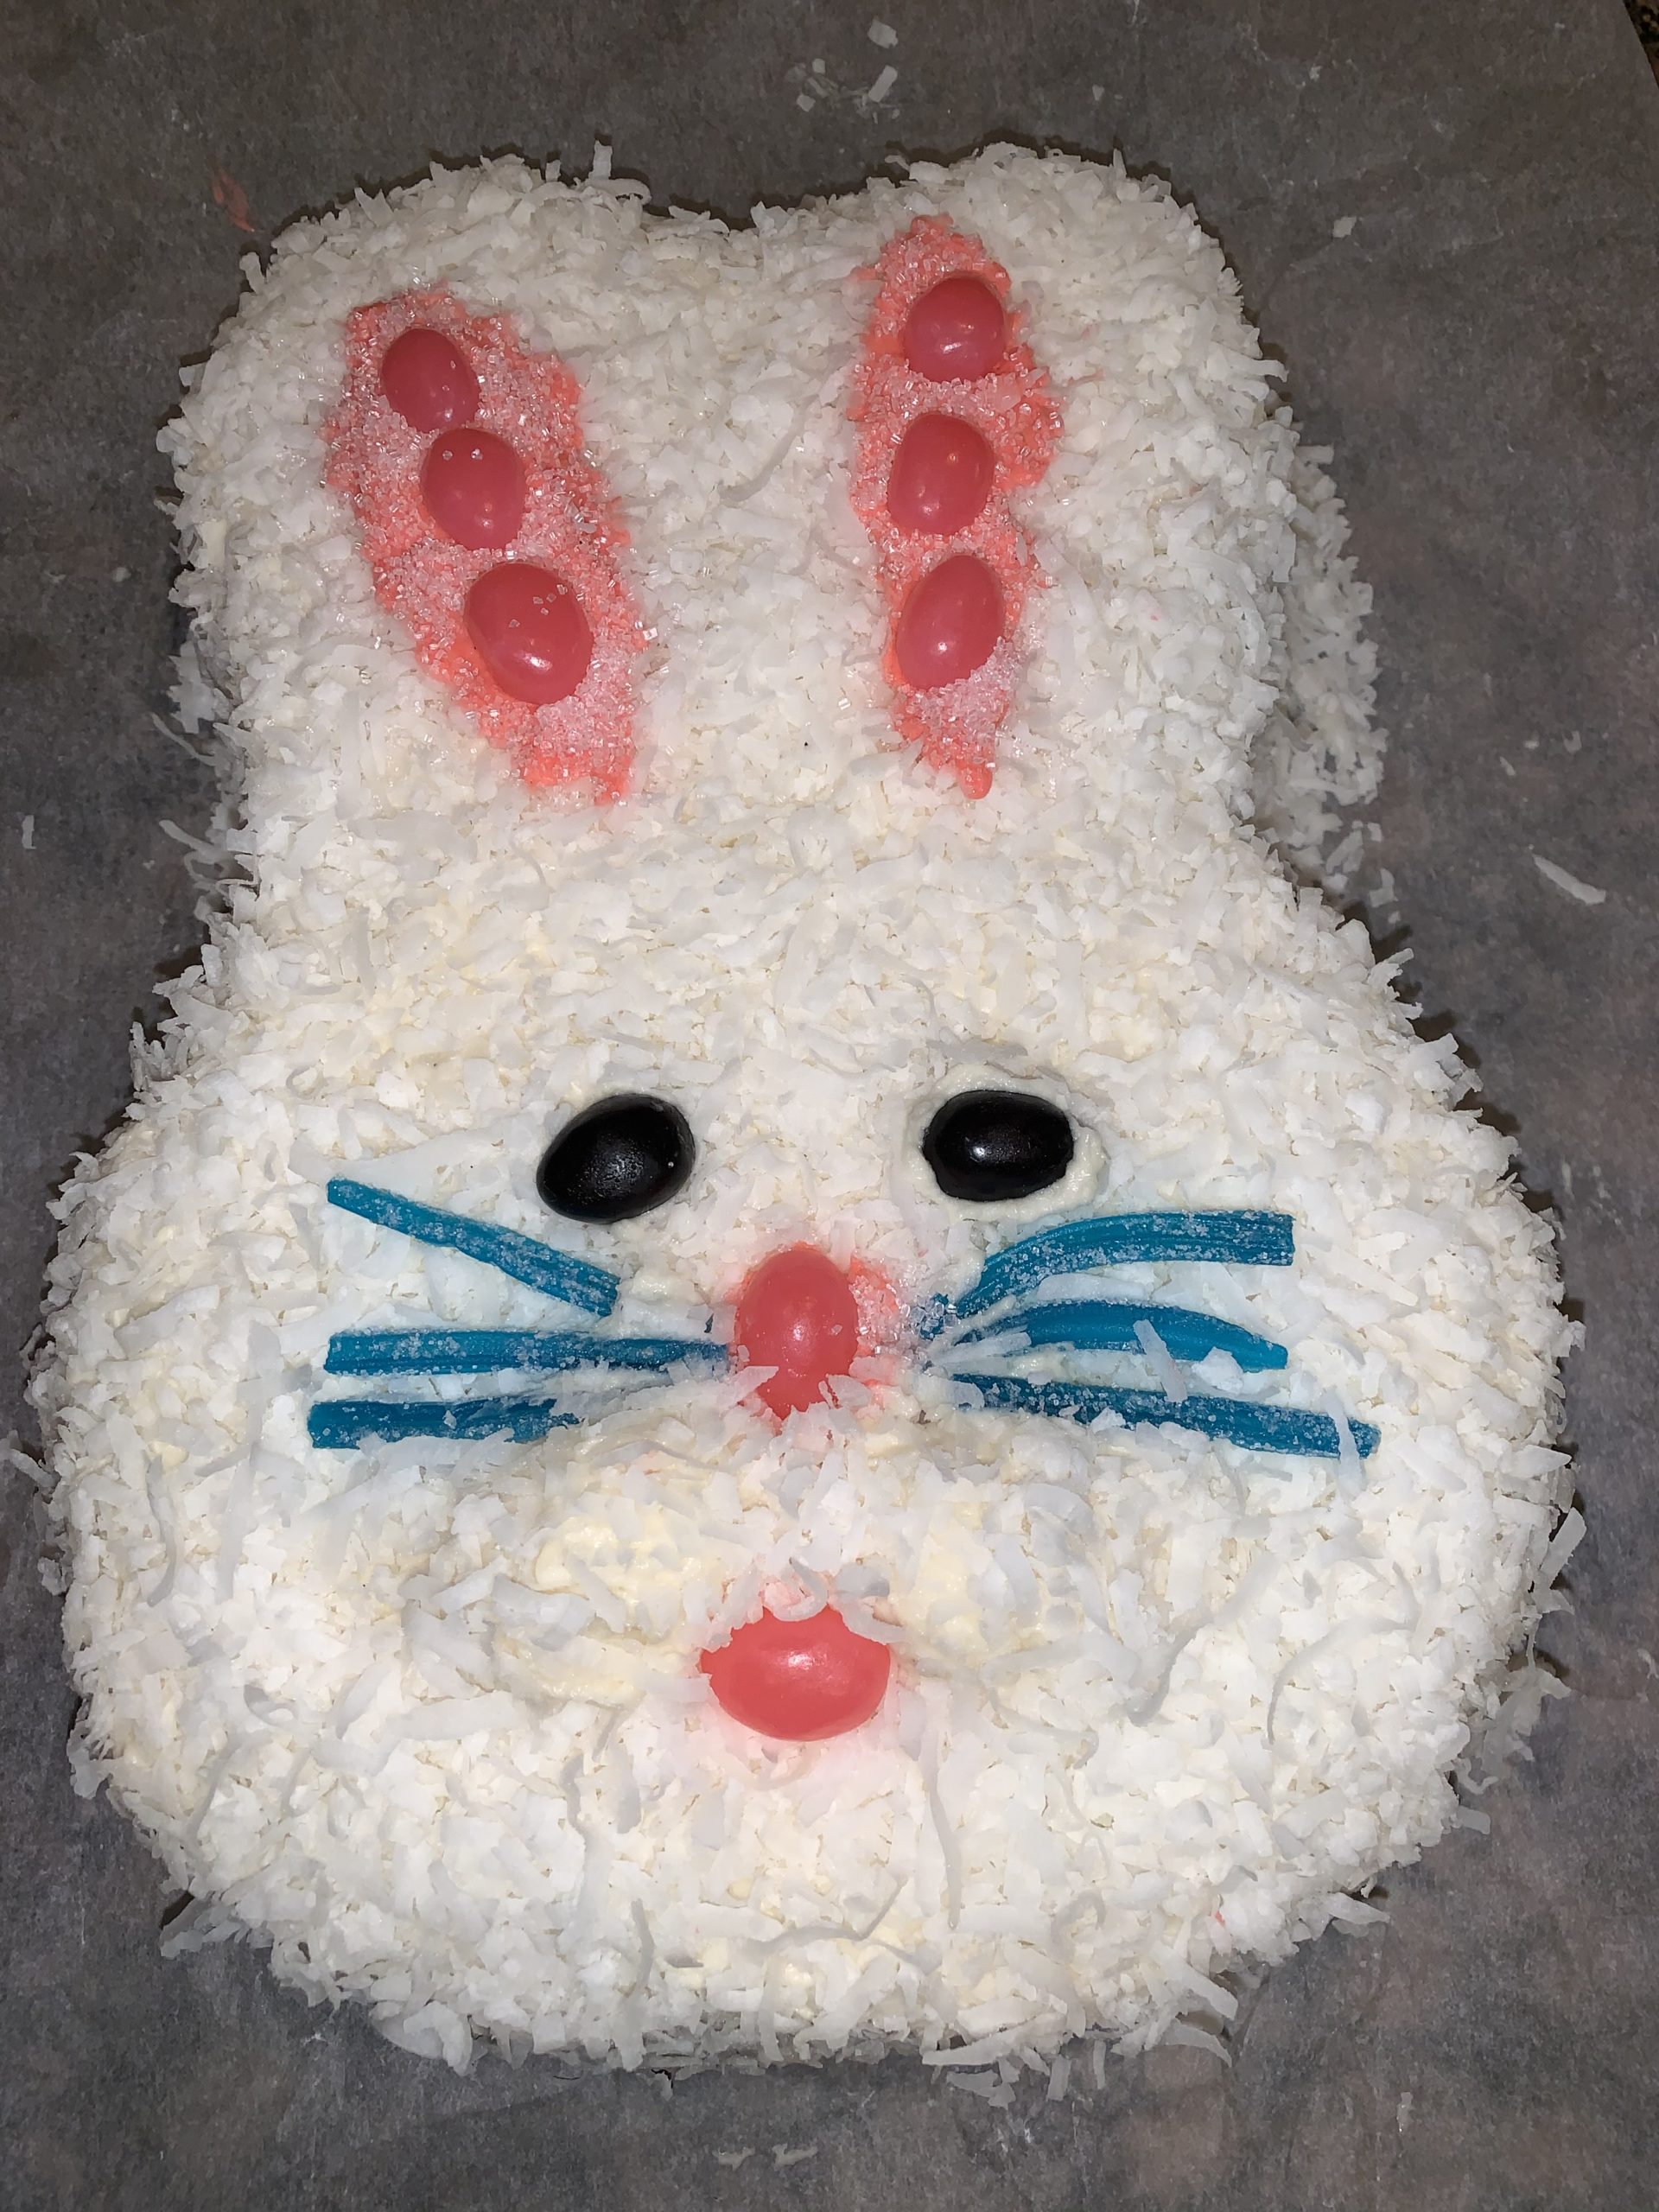 Easy Coconut Easter Bunny Cake Decoration – THE LAZY CRAFTER